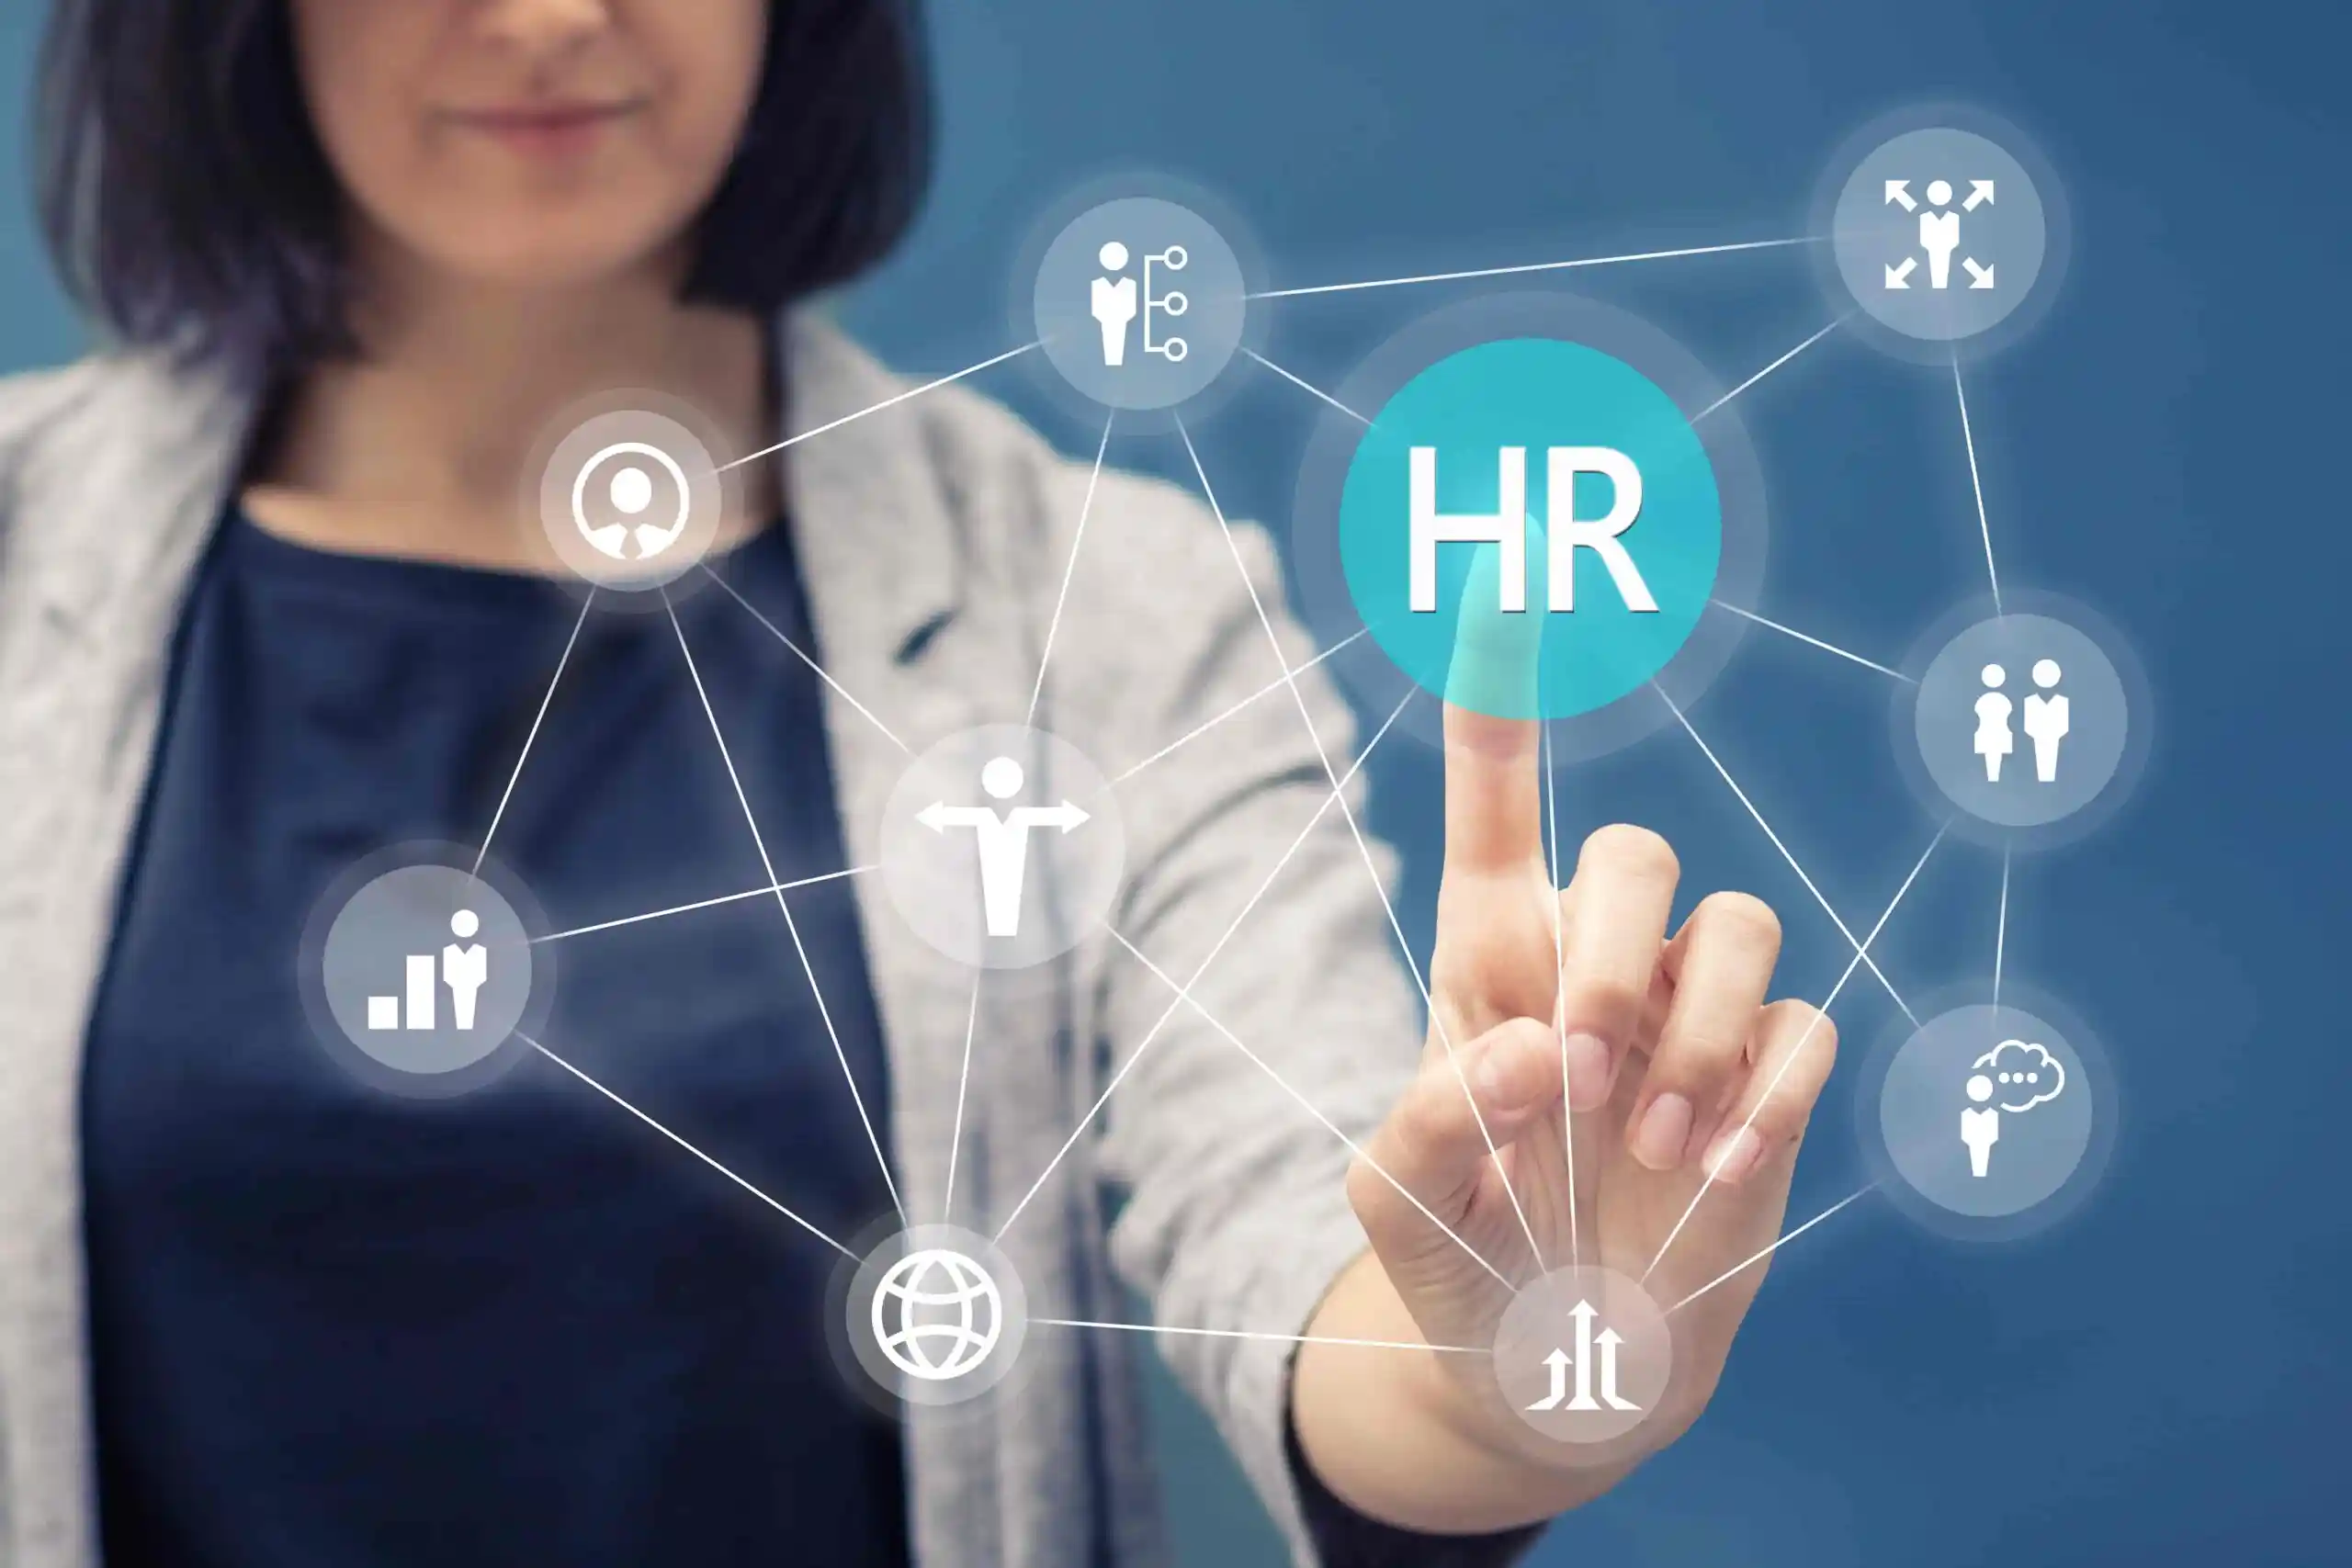 Here is everything you need to know about HR courses, job opportunities, HR trends, and more!